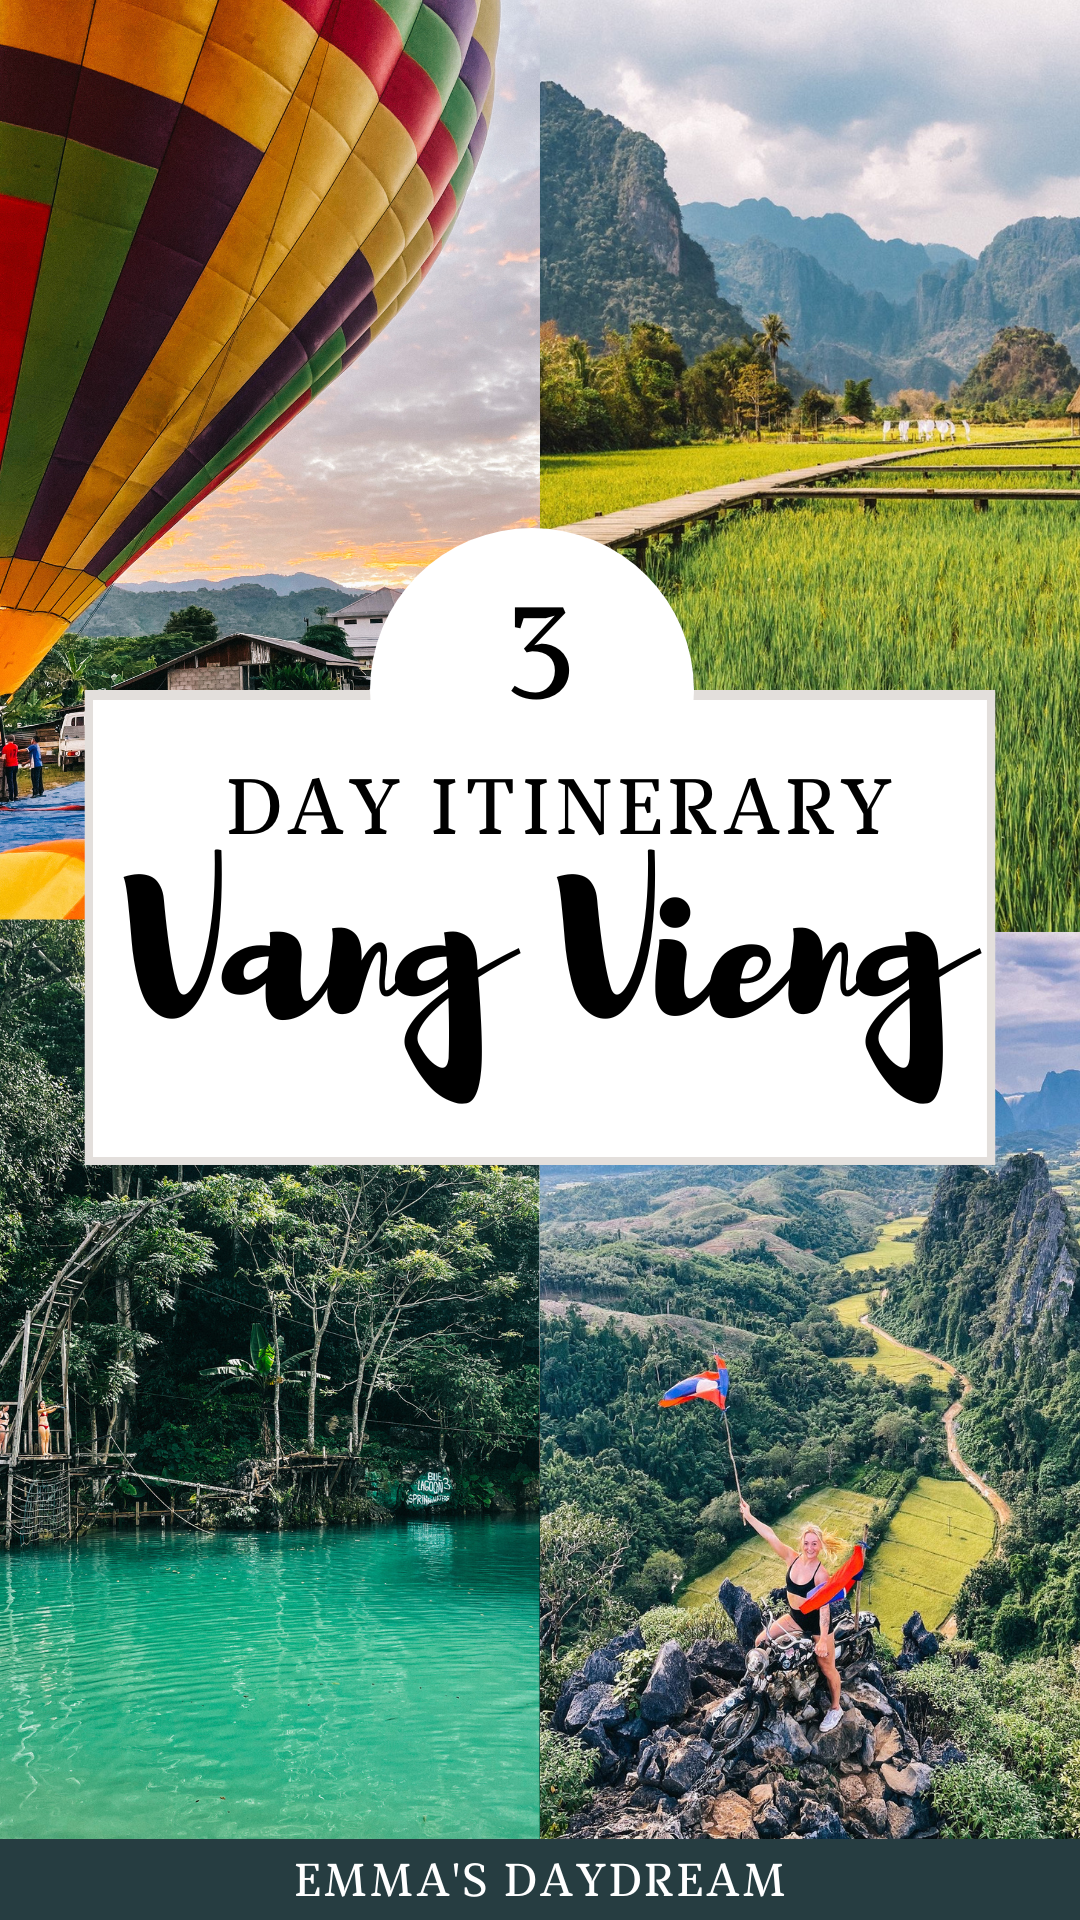 Things to do in Vang Vieng: Blue Lagoons, Nam Xay Viewpoint